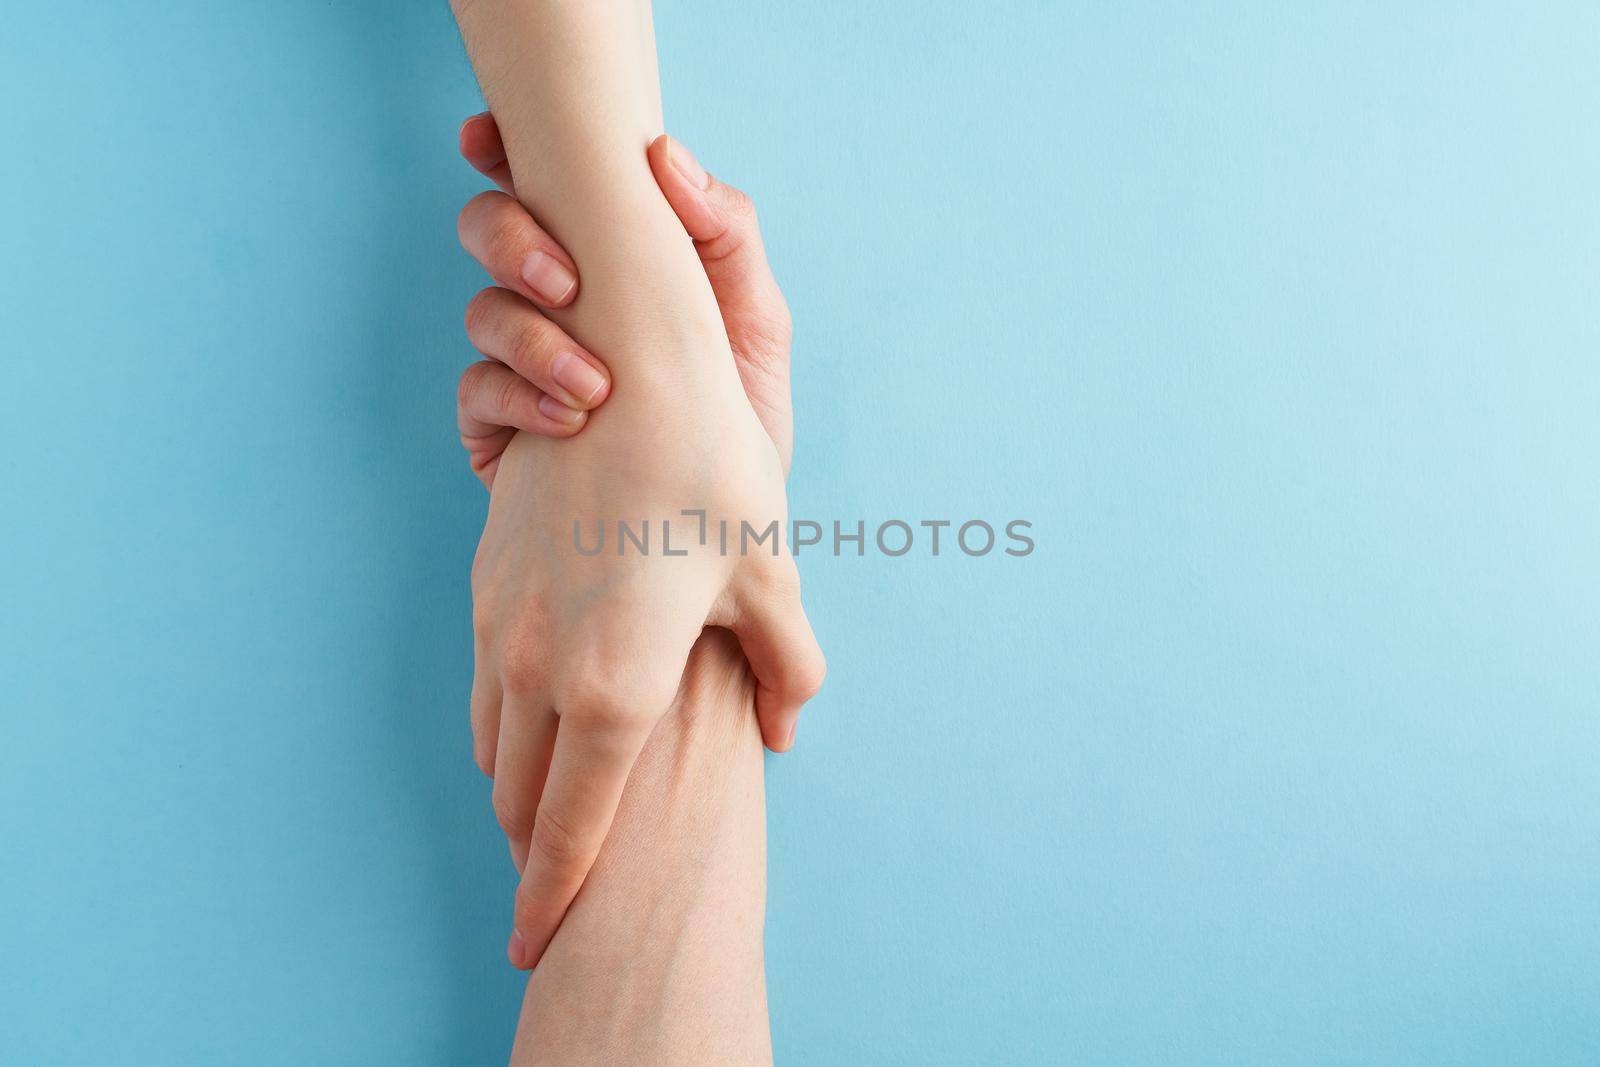 Helping hand, support in difficult situation, crisis. Last chance, hope concept. Two hands holding each other on blue background. Psychological service